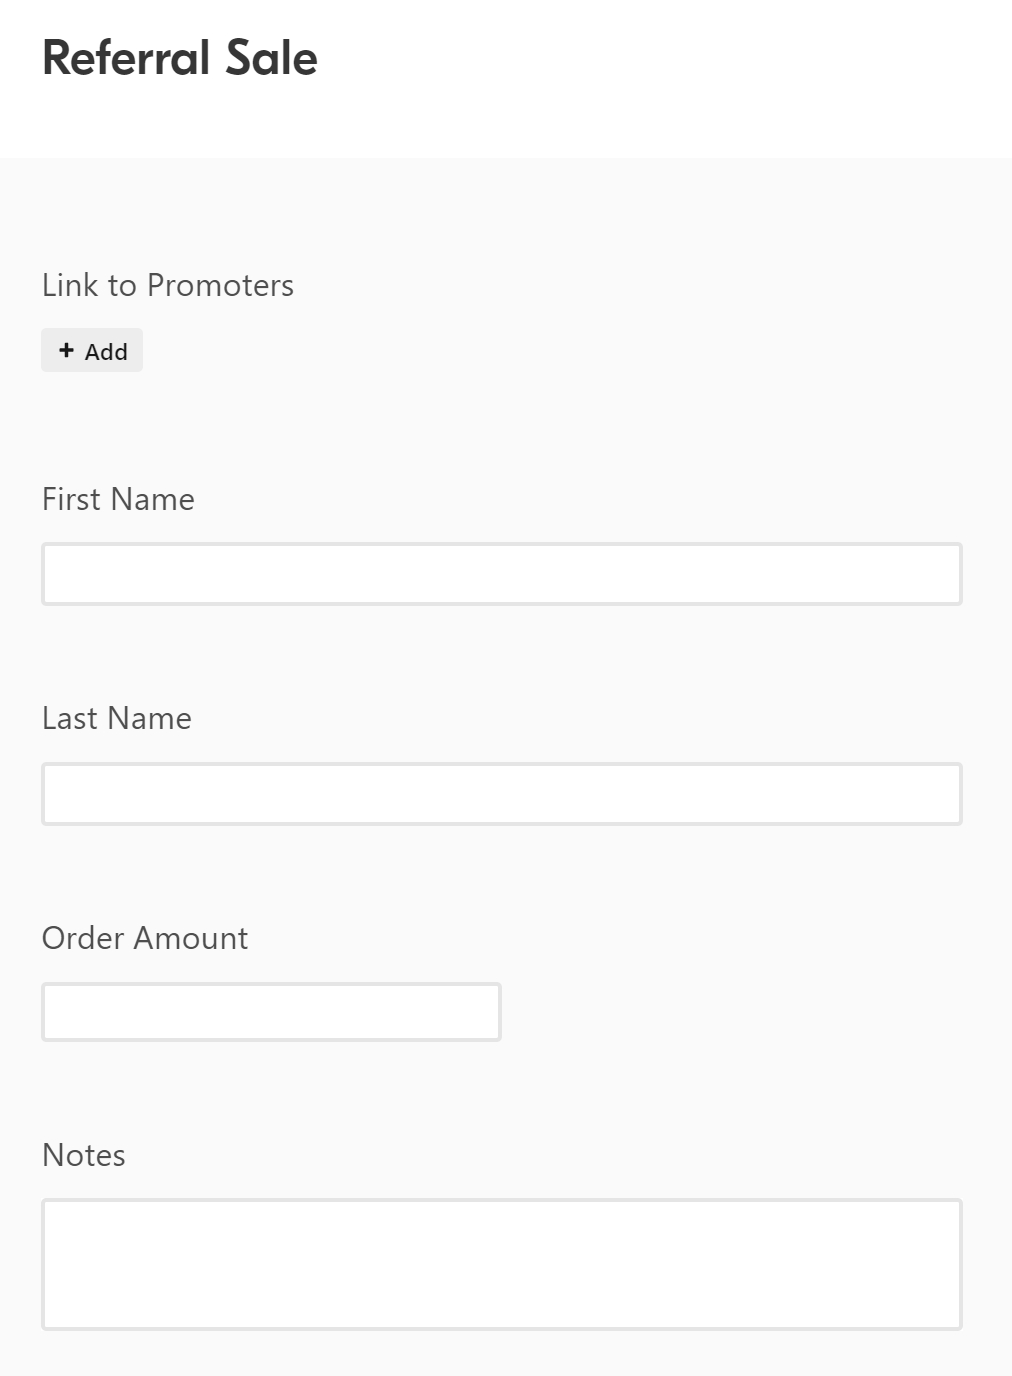 Referral Tracking – How To Set Up And Track Your Referrals With Referral Card Template